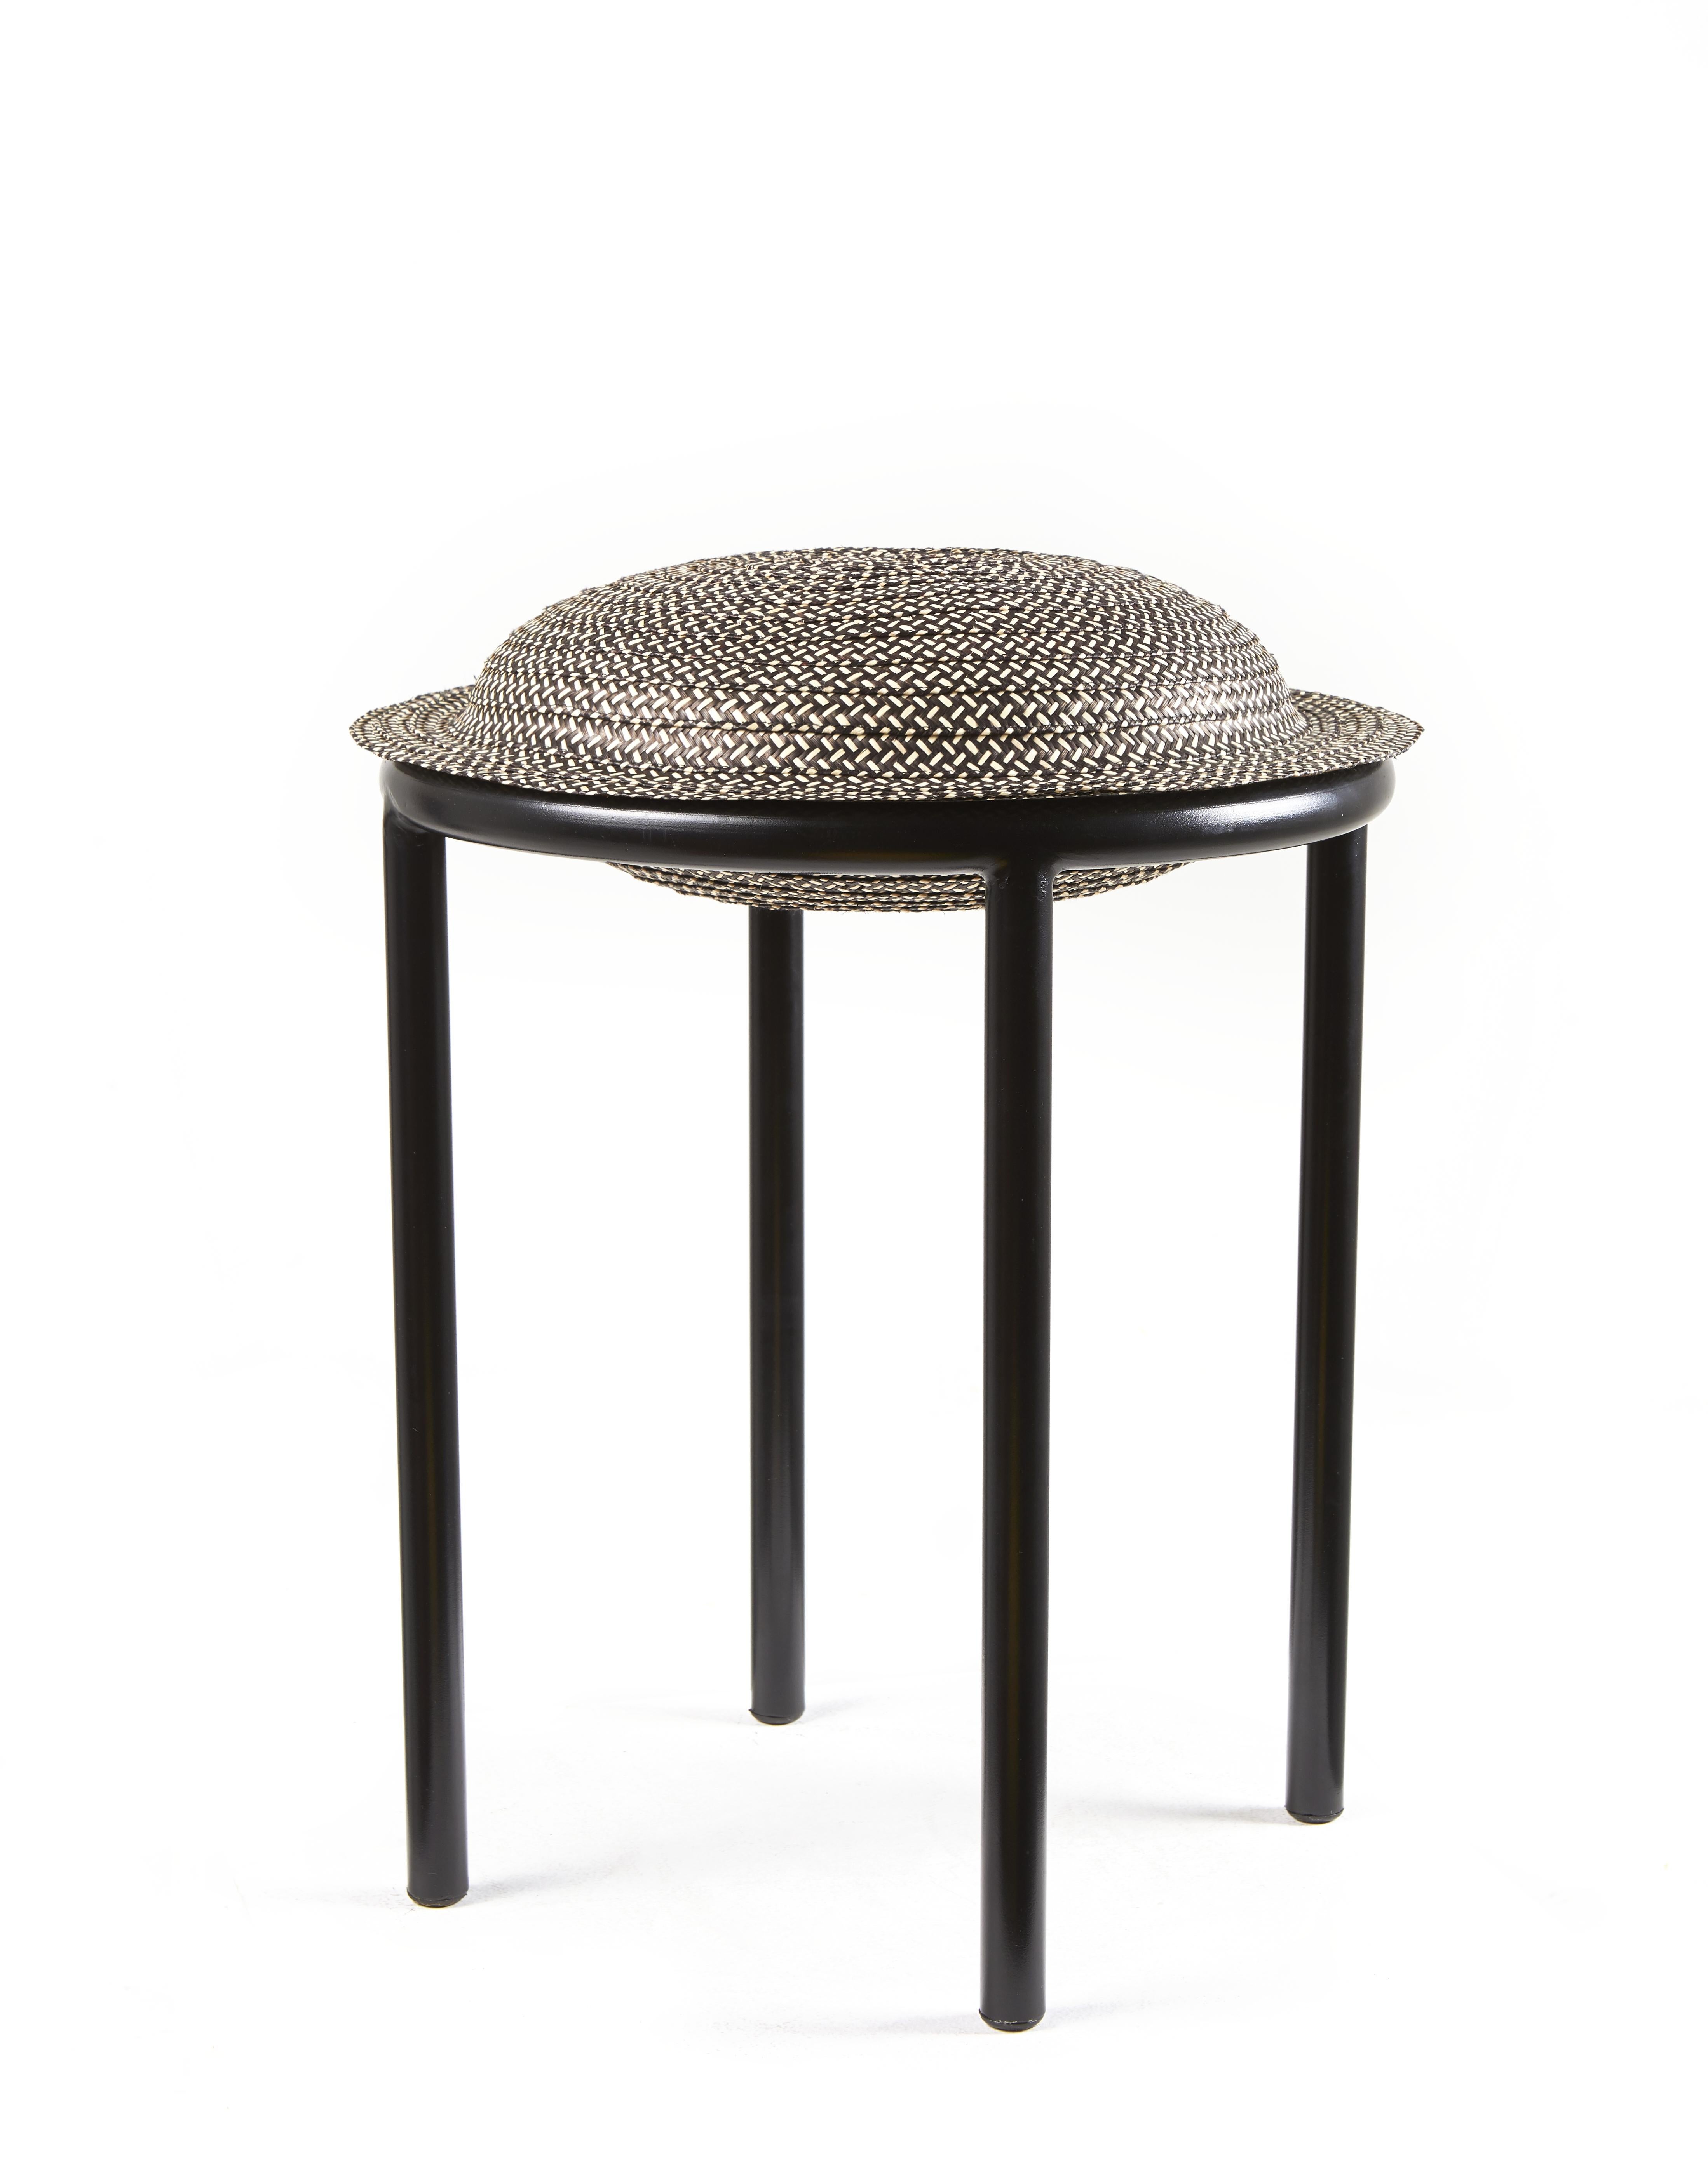 Set of 2 Black cana stool by Pauline Deltour by Cristina Celestino.
Materials: Galvanized and powder-coated tubular steel. Caña Flecha.
Technique: Hand-woven with natural fibers in Colombia. Natural dyed. 
Dimensions: Diameter 40.2 x height 48.1